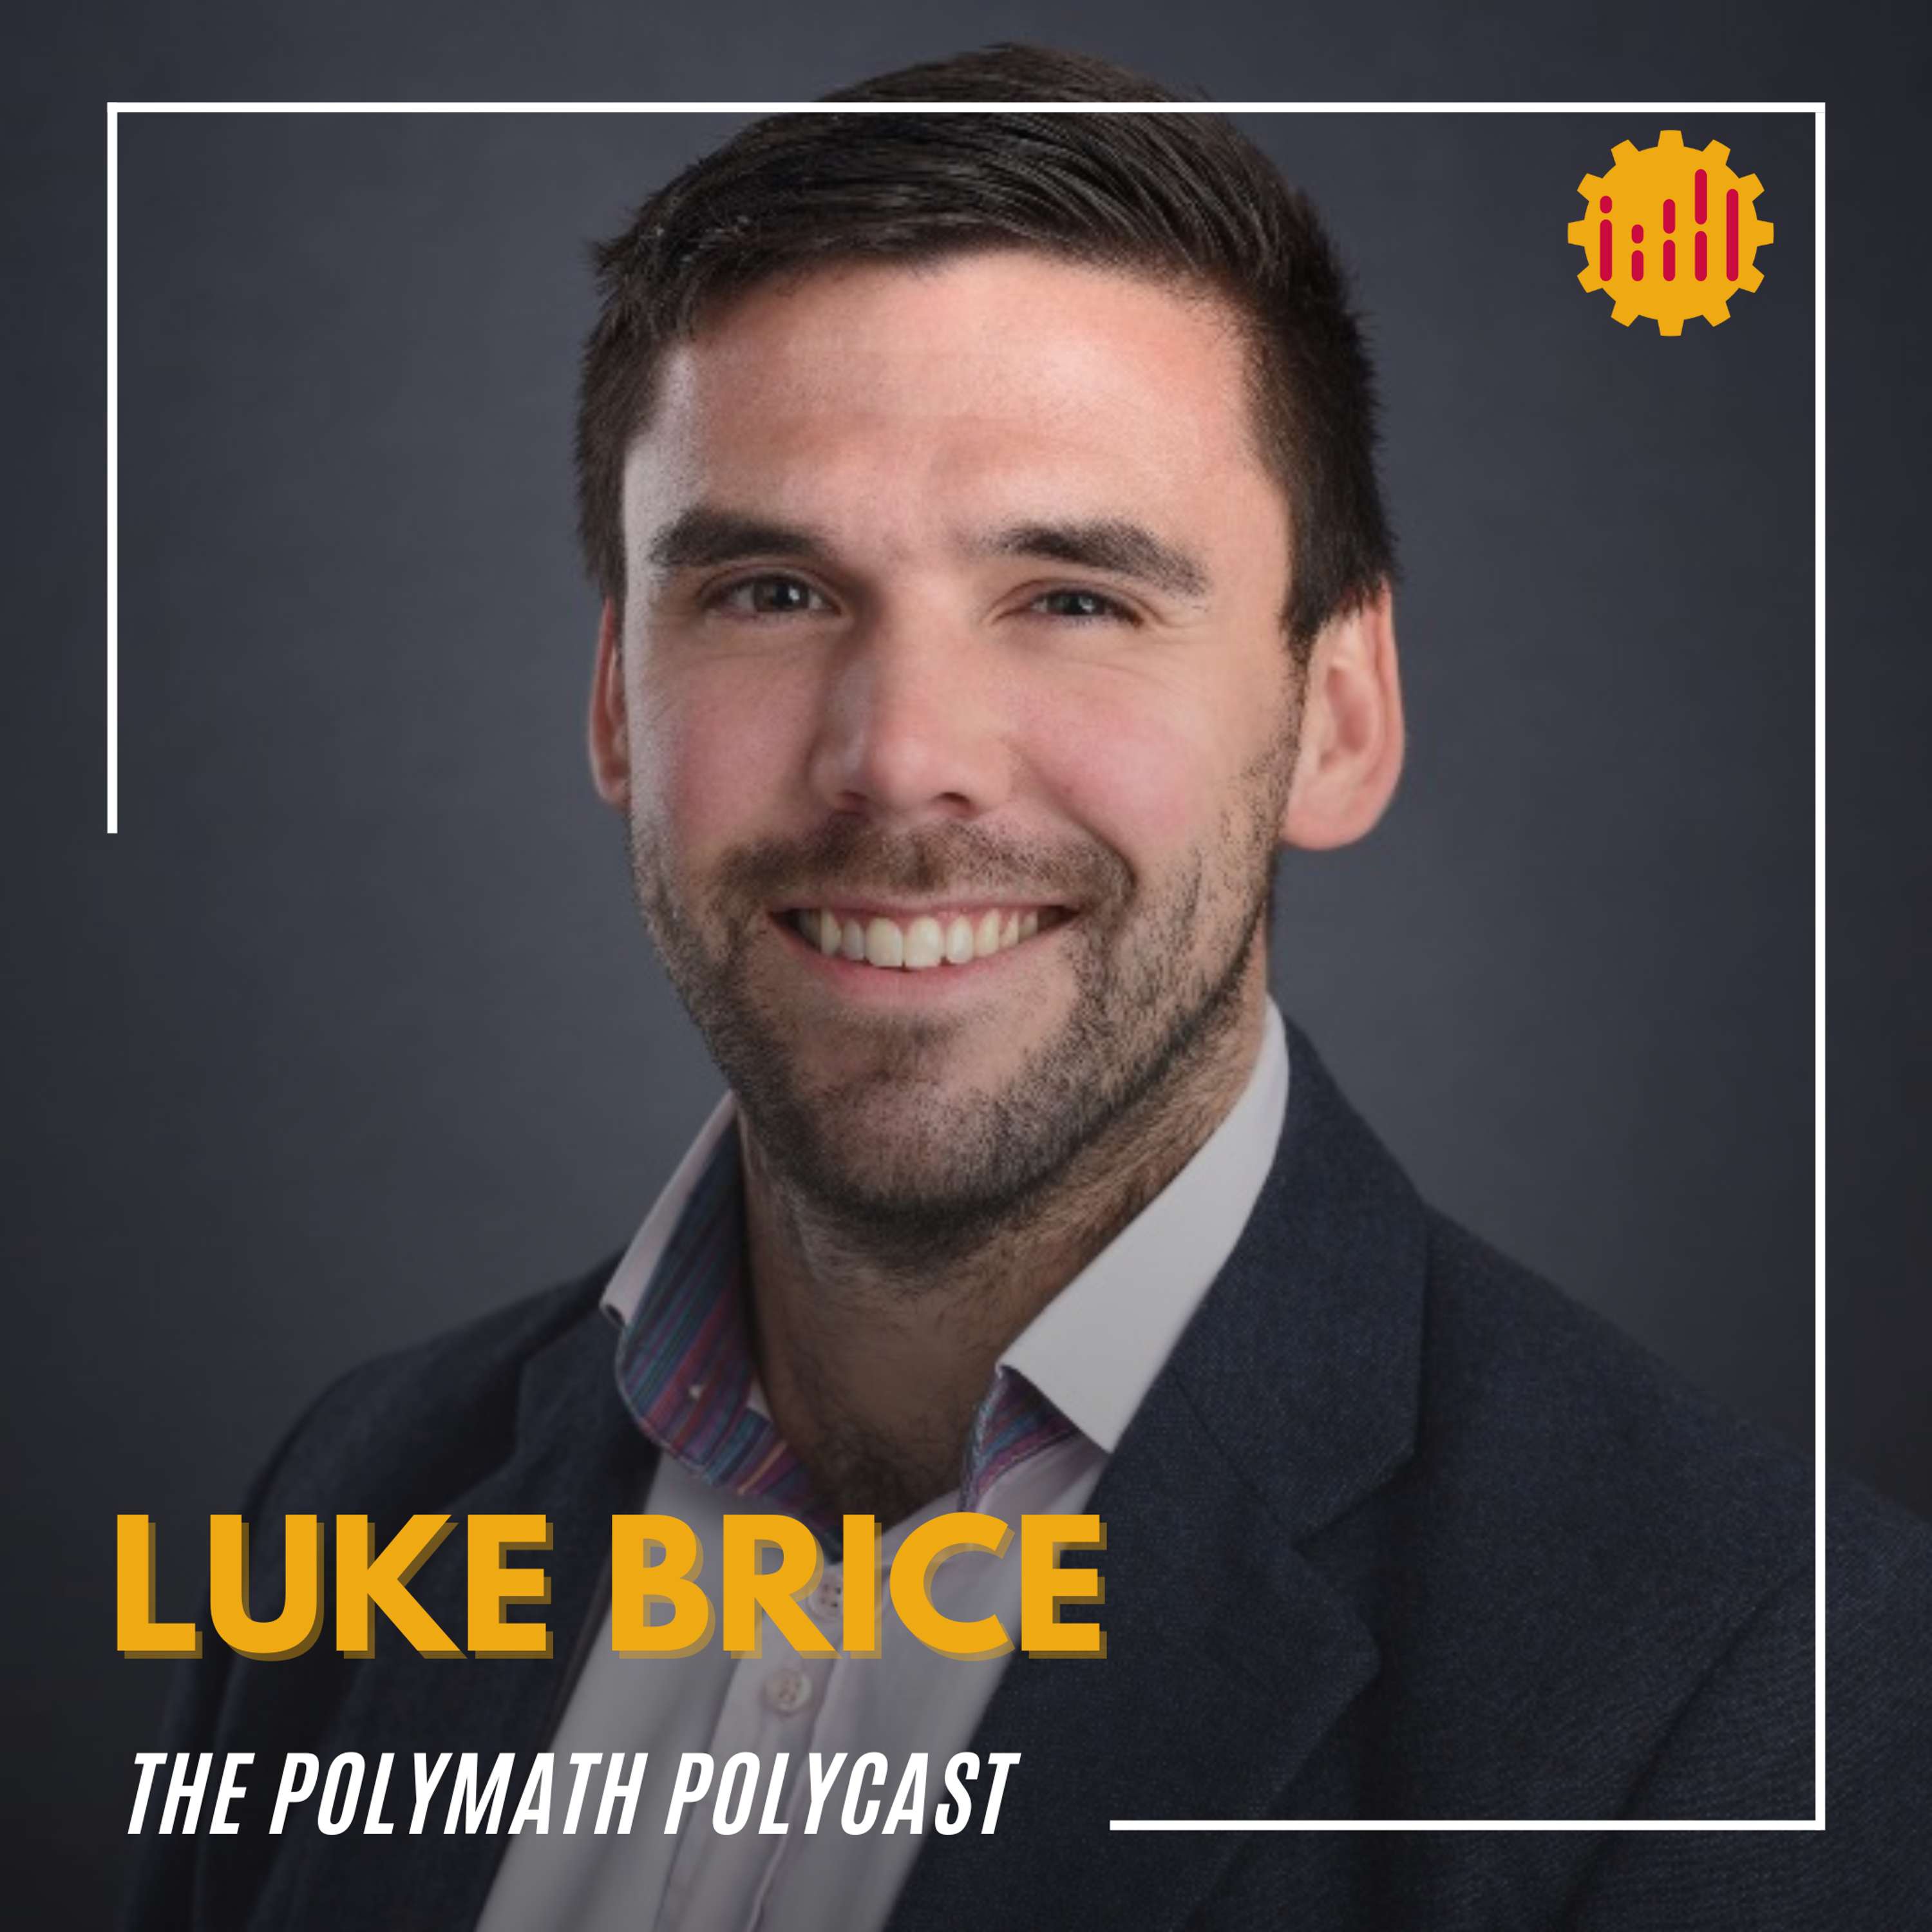 Having an interest in EVERYTHING with Luke Brice [Interview]